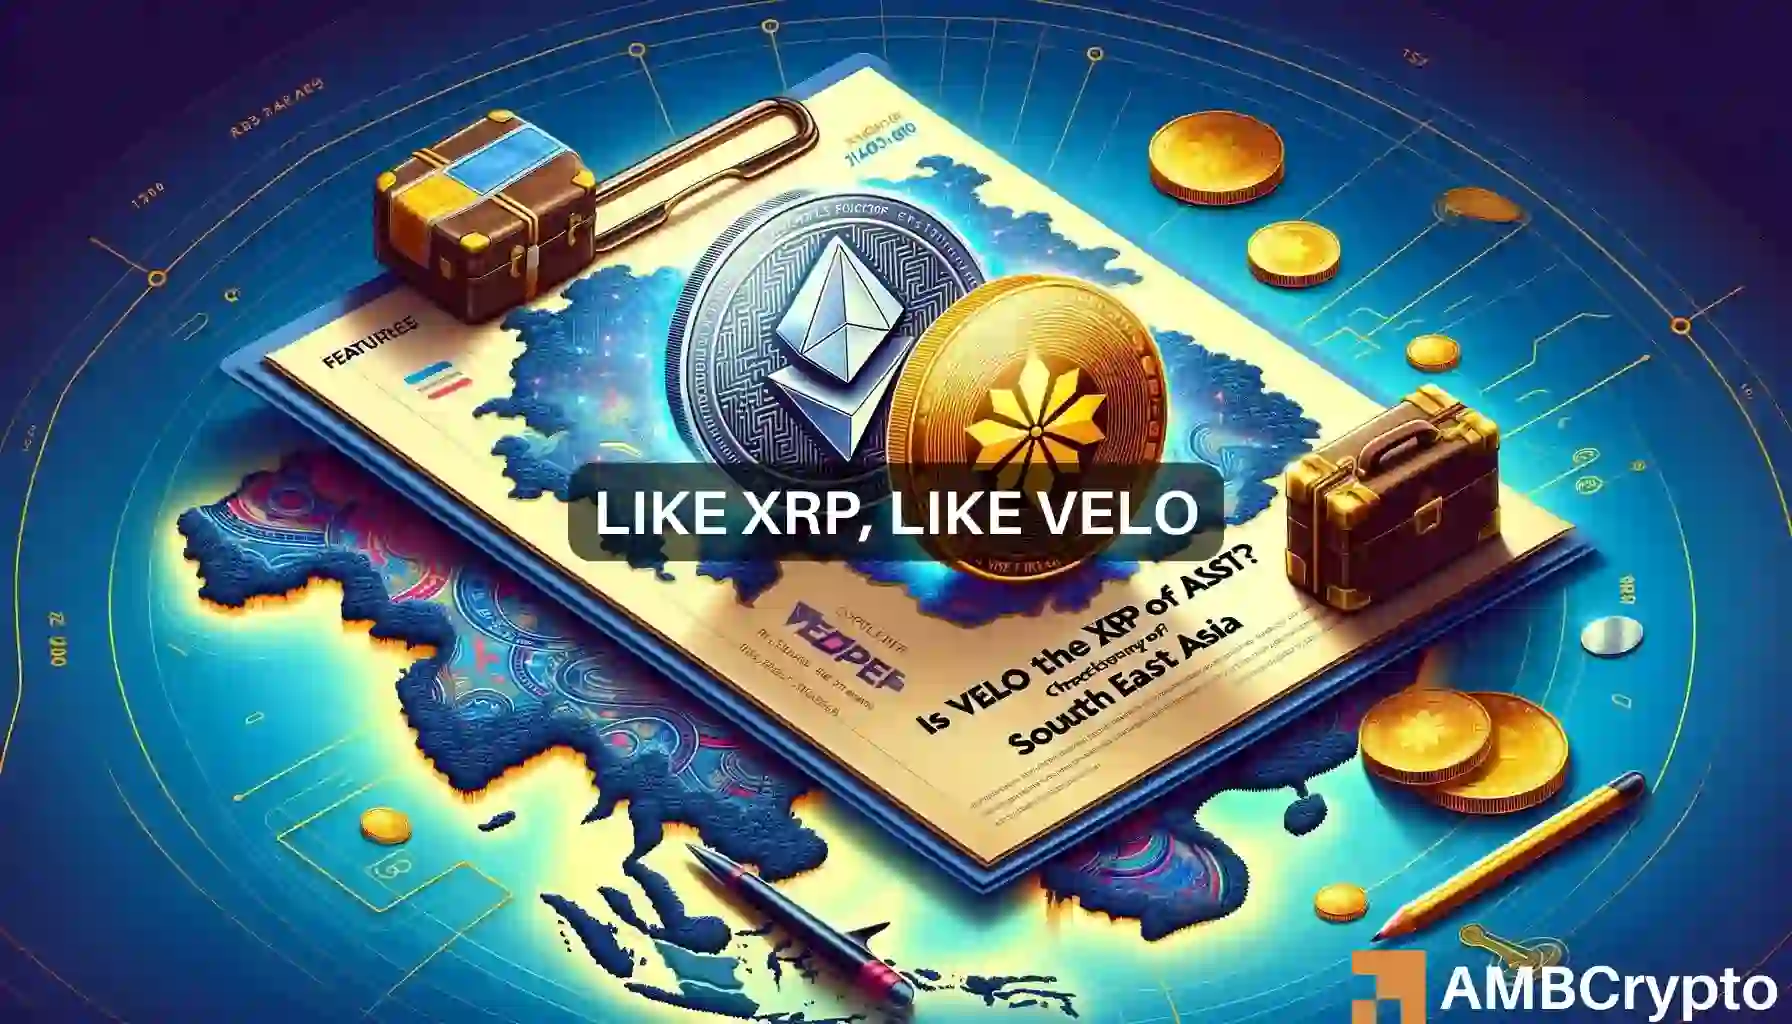 Is VELO the XRP of South East Asia? Long way to go, but…